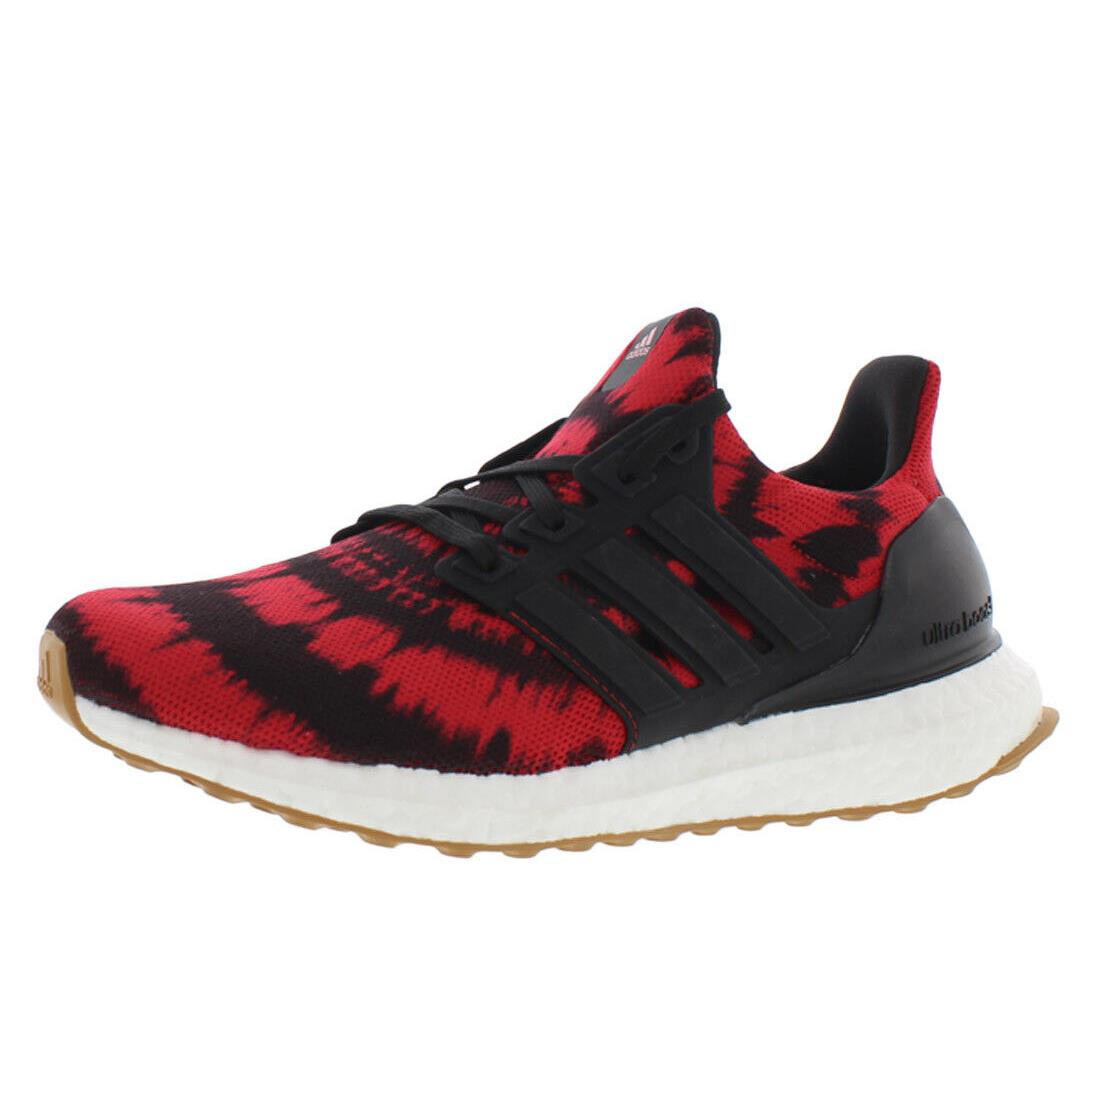 Adidas Ultraboost Nk Boys Shoes Size 5 Color: Red Tie Dye/black/white